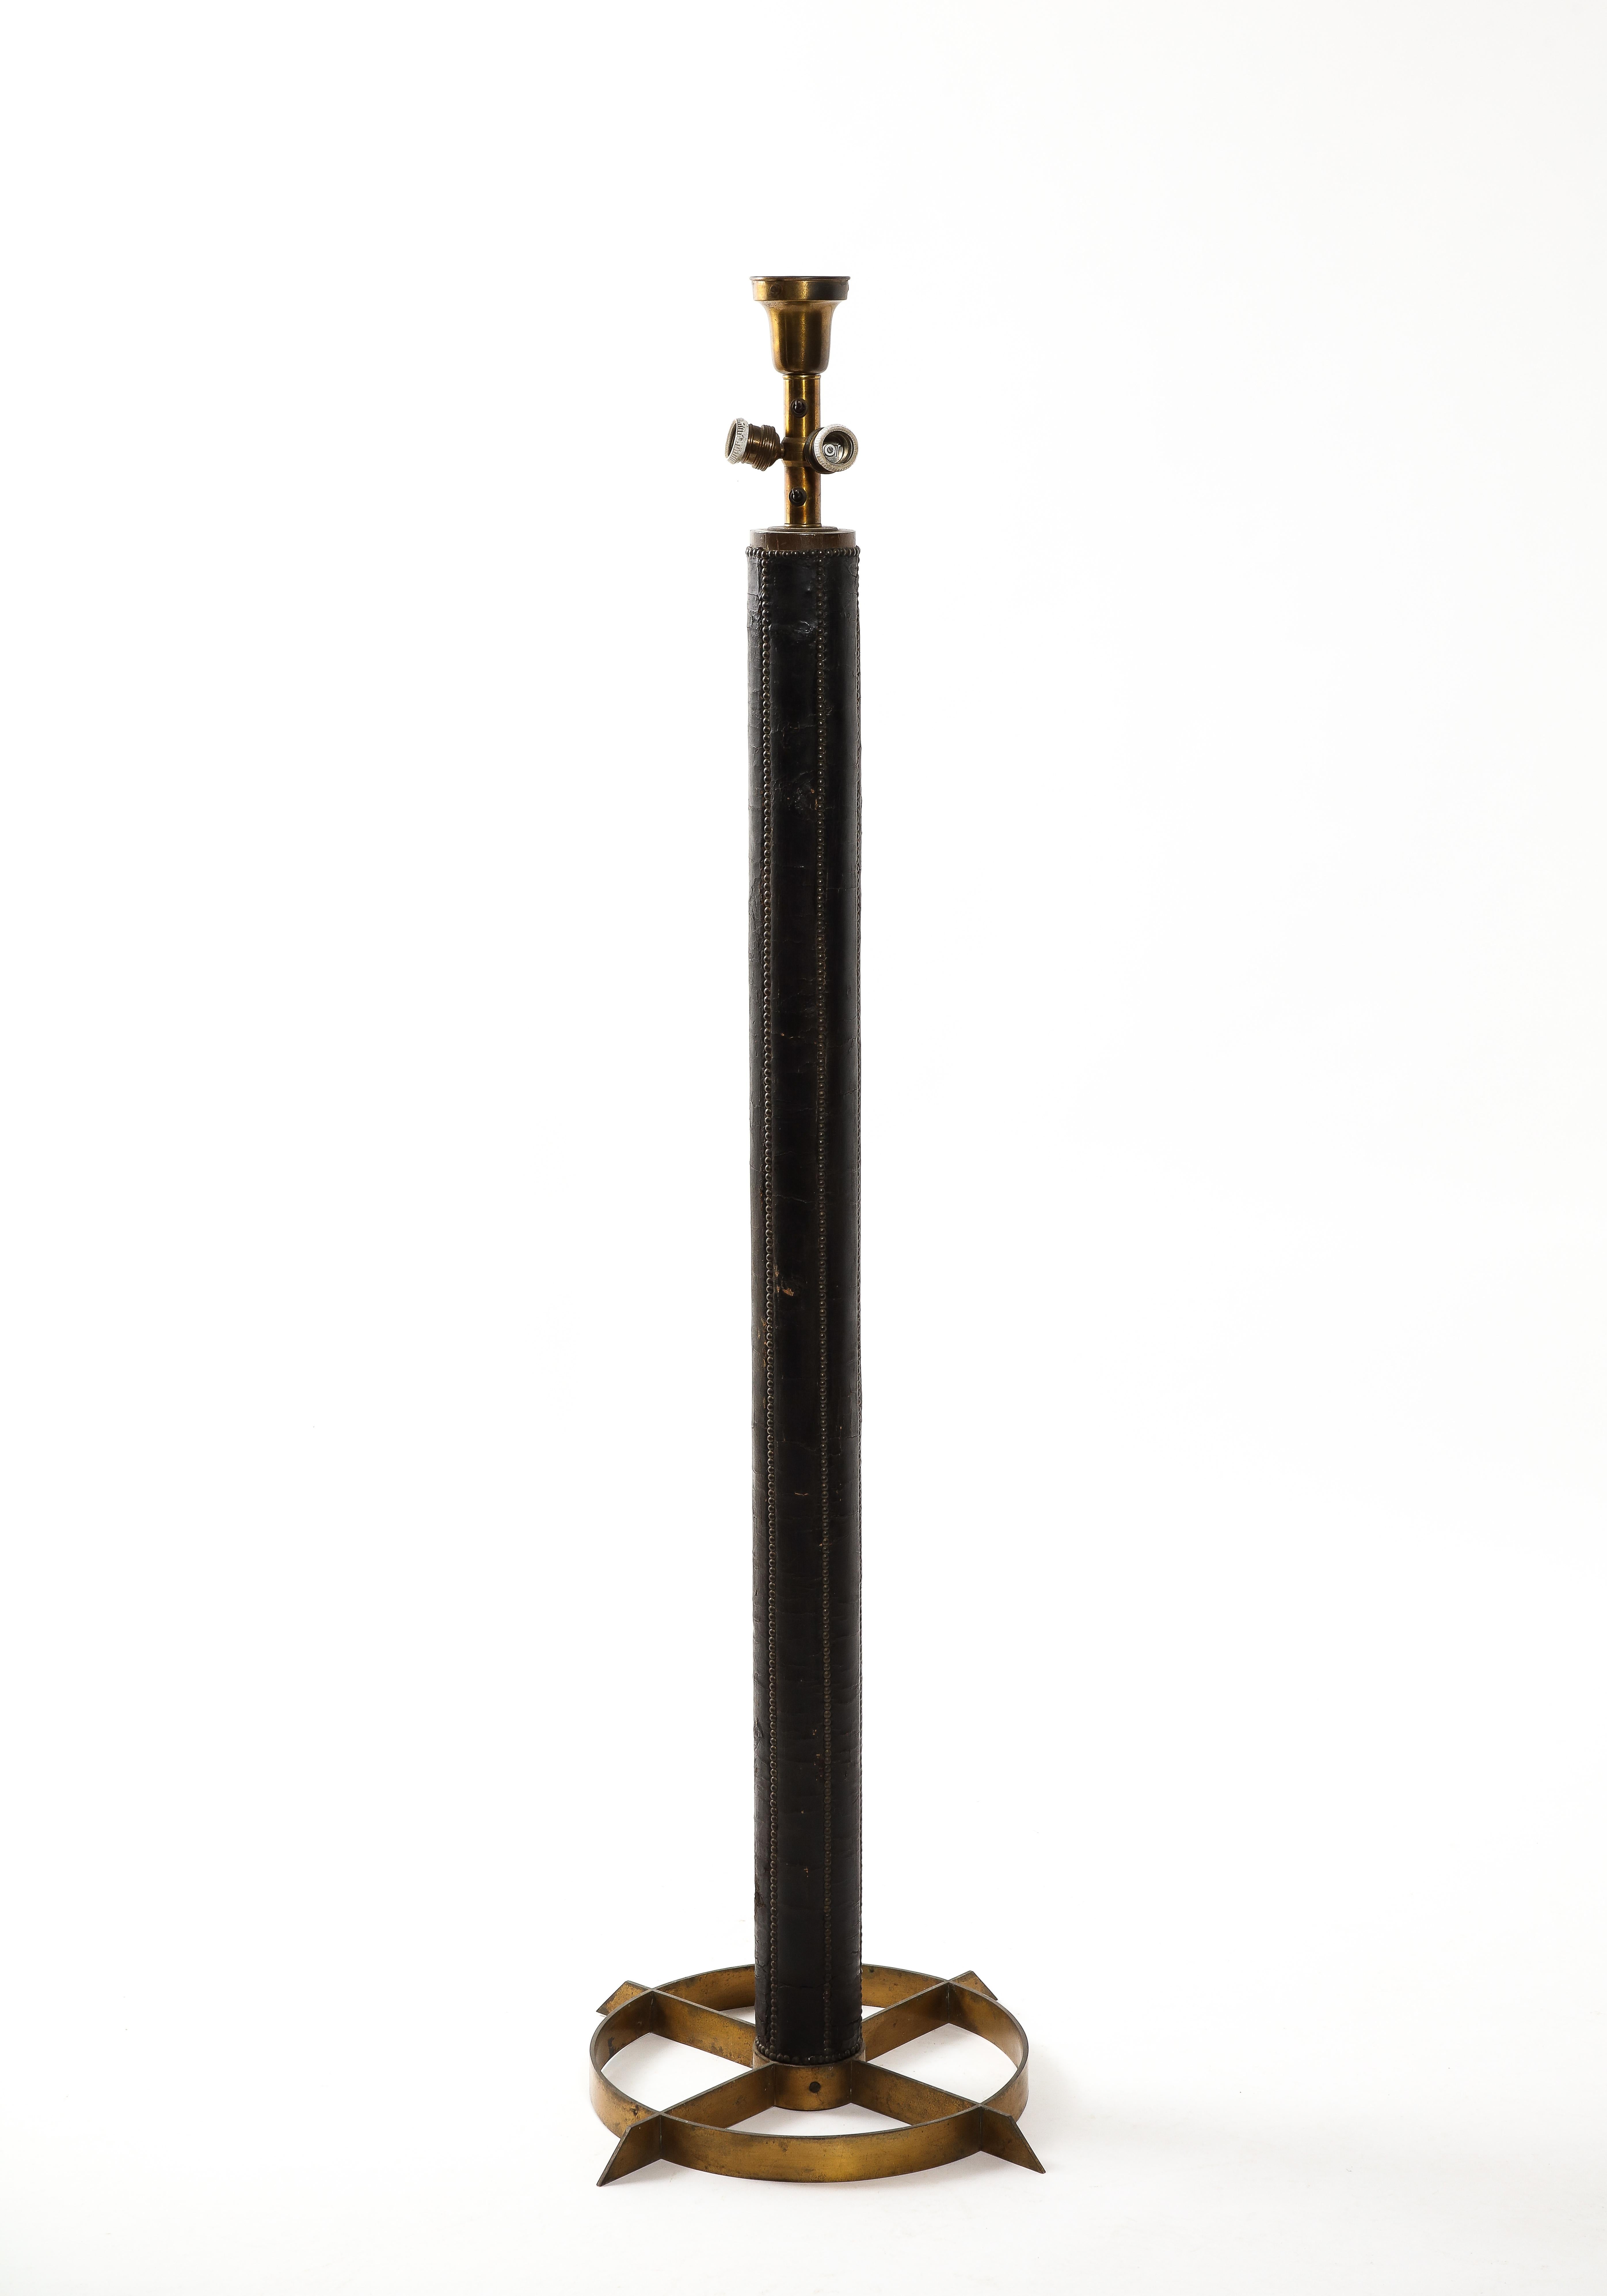 Distinctive nail-studded leather floor lamp on a circular bronze base, great patina.